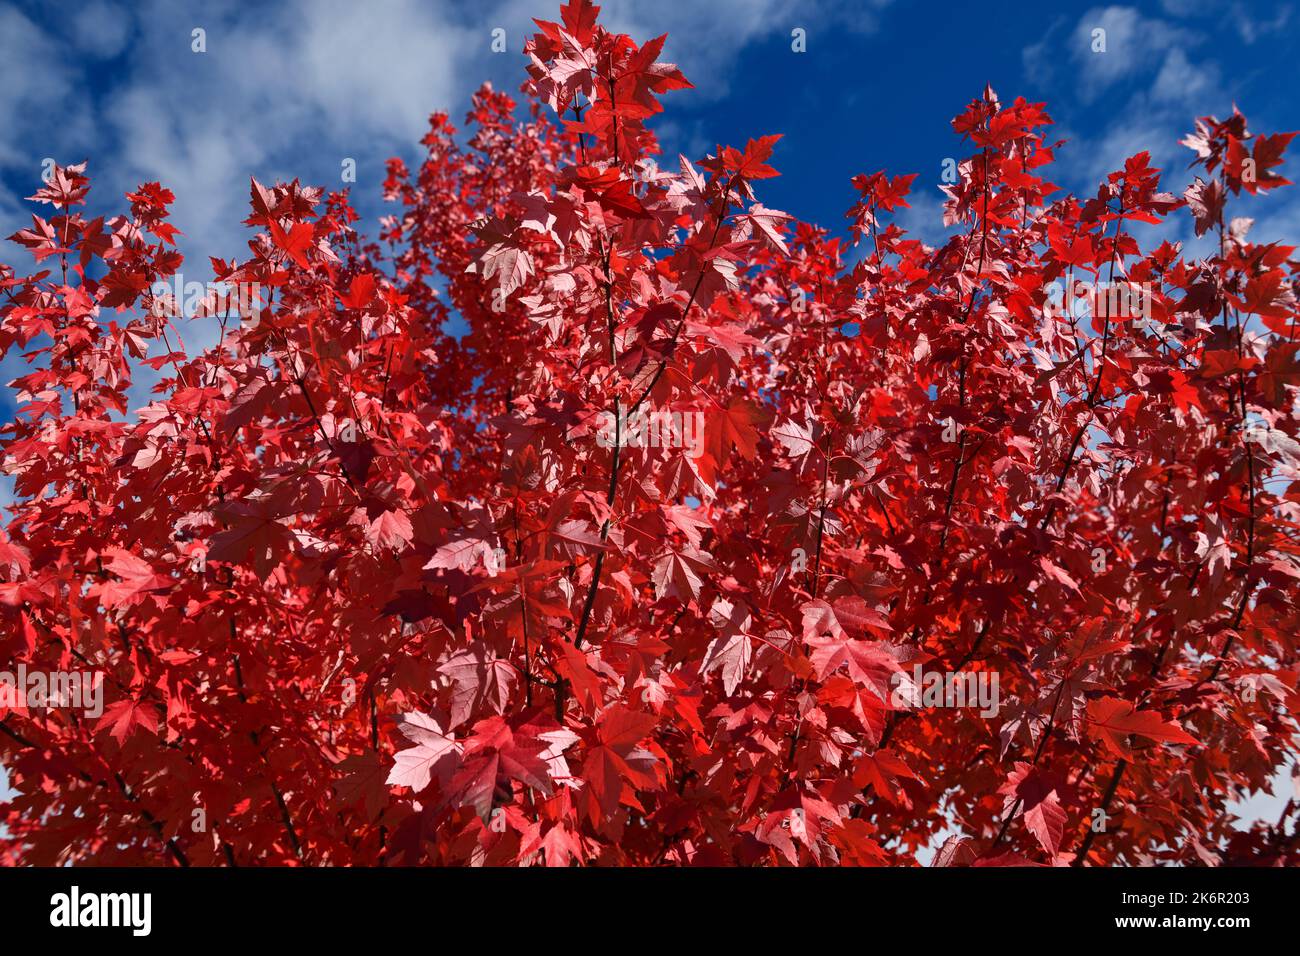 Red Maple leaves on tree in Autumn with blue sky in Canada Stock Photo